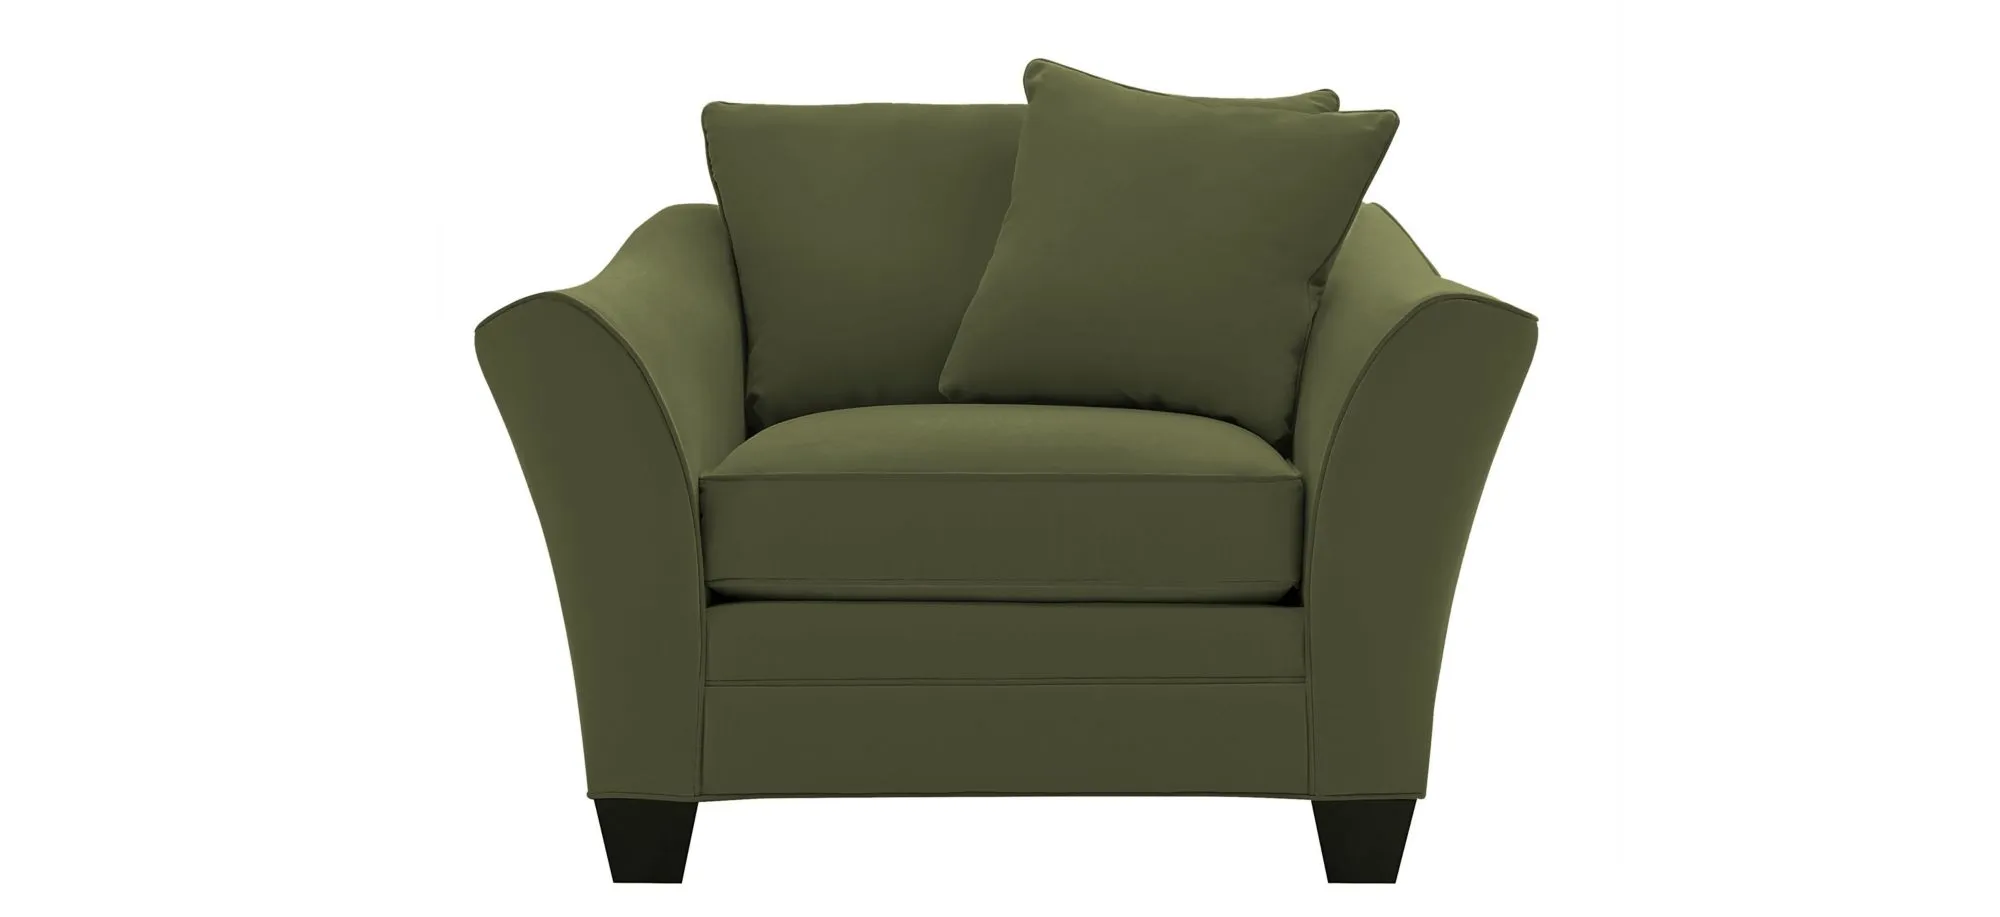 Briarwood Chair in Suede So Soft Pine by H.M. Richards